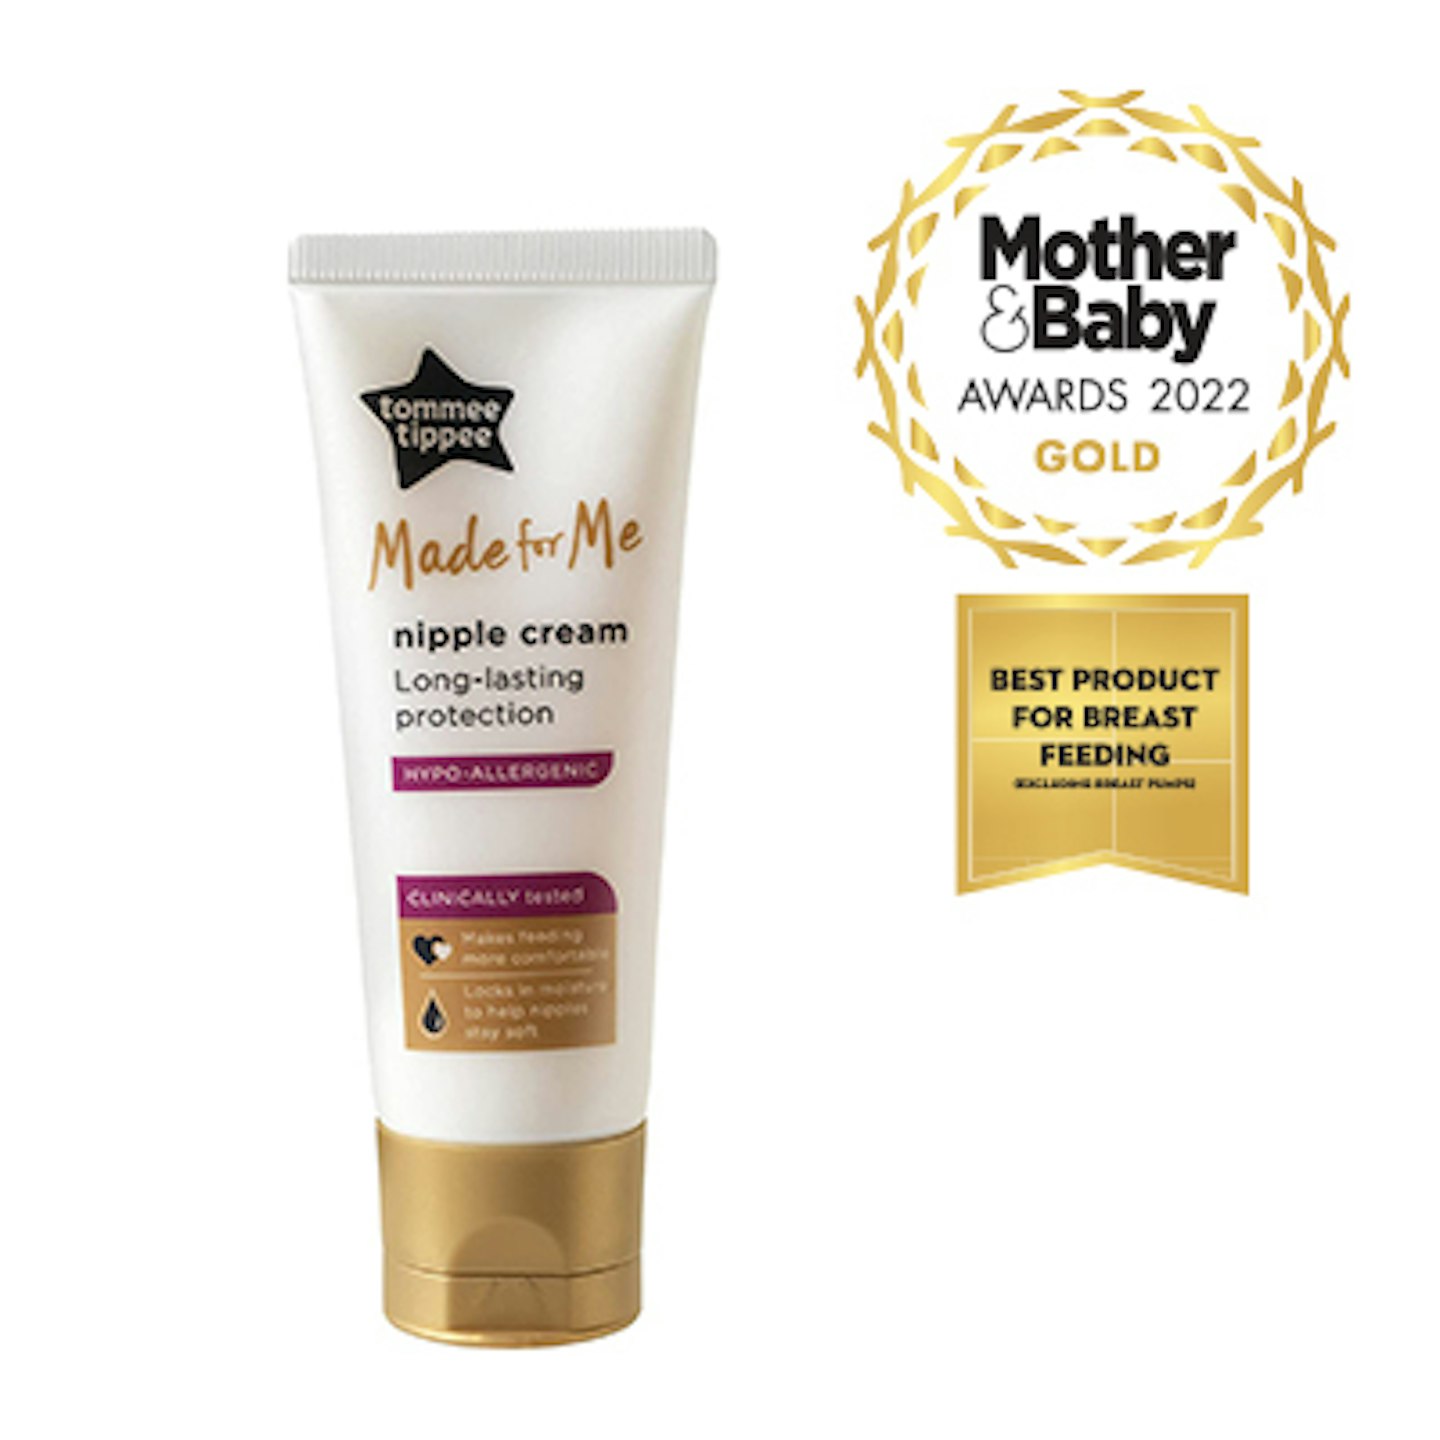 SQUARE-gold-breast-feeding-product (1)